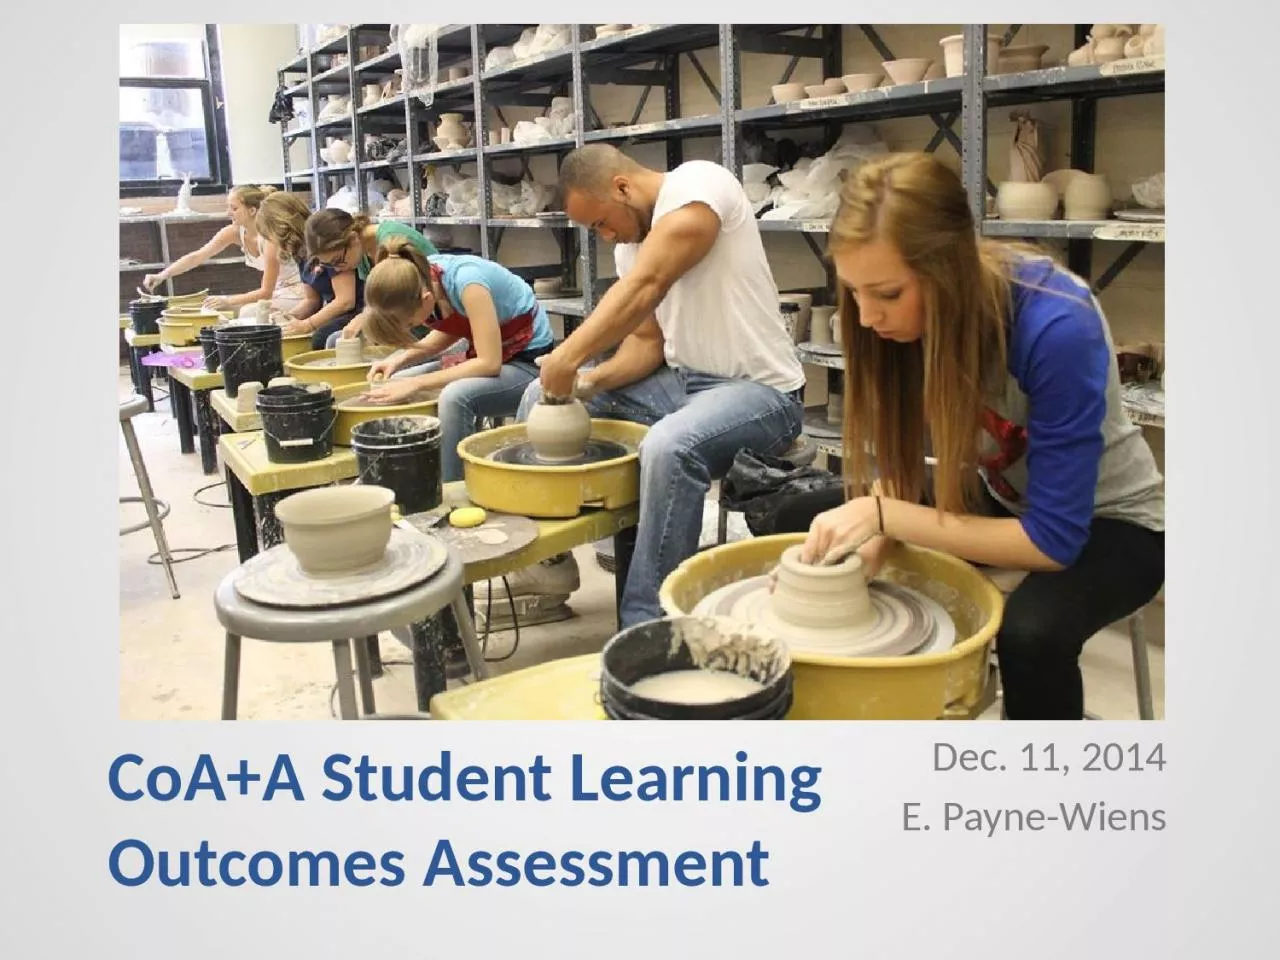 CoA+A Student Learning Outcomes Assessment